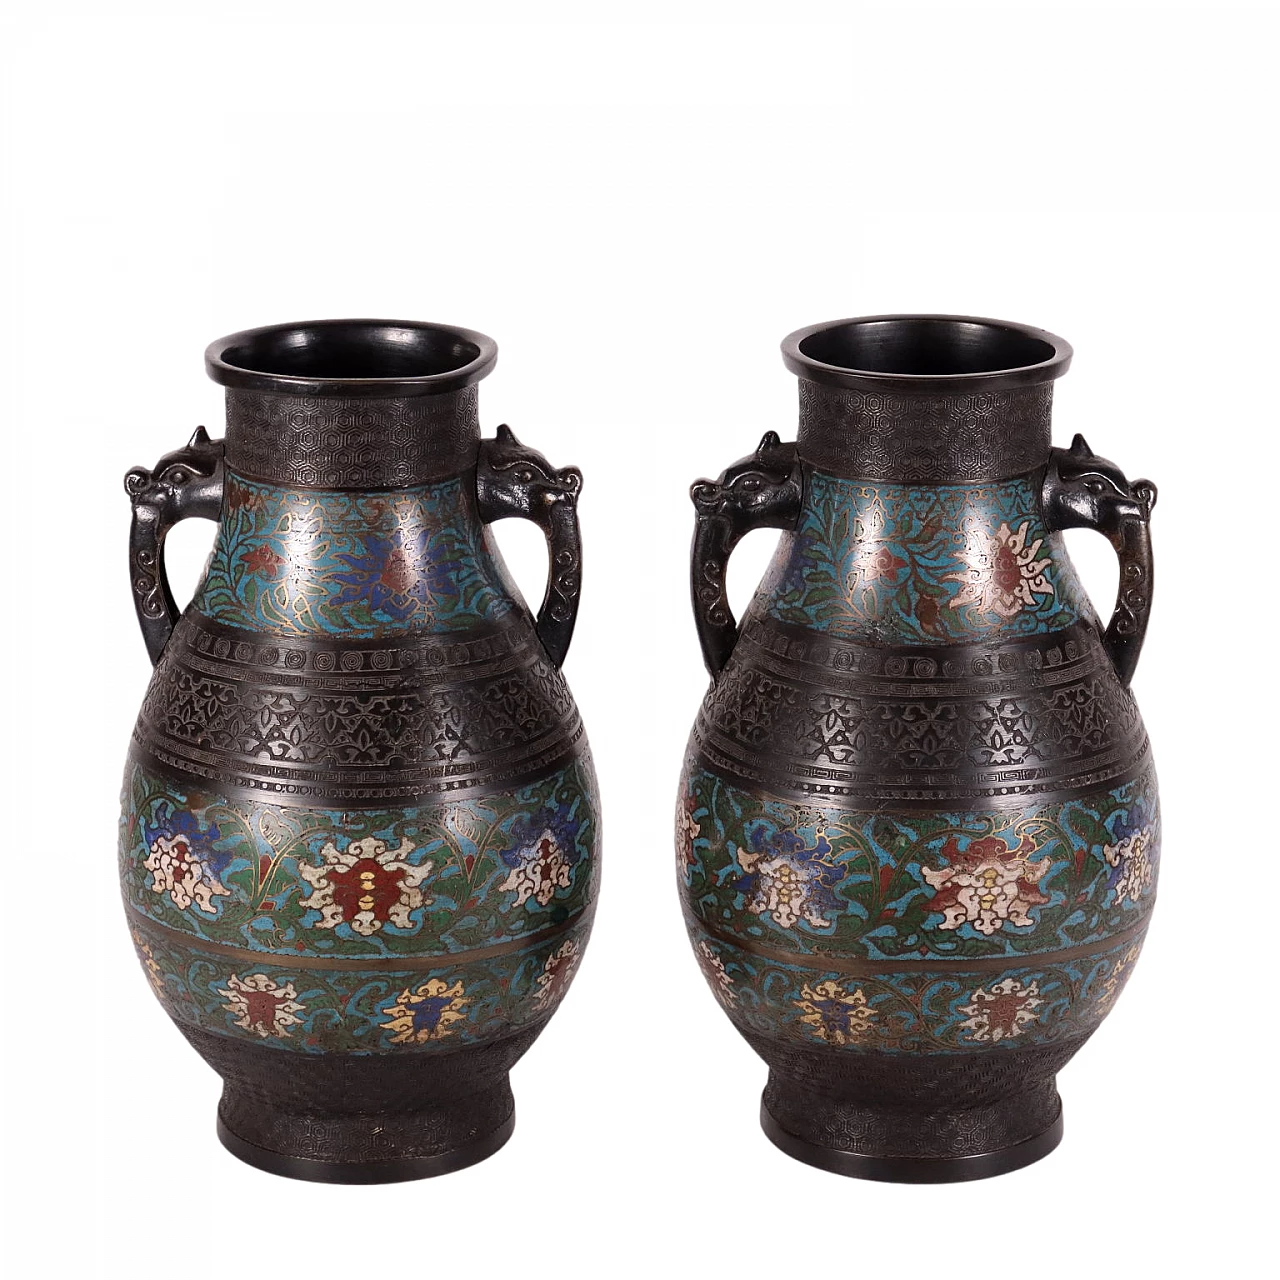 Pair of Japanese bronze vases decorated with cloisonné enamels, mid-19th century 1